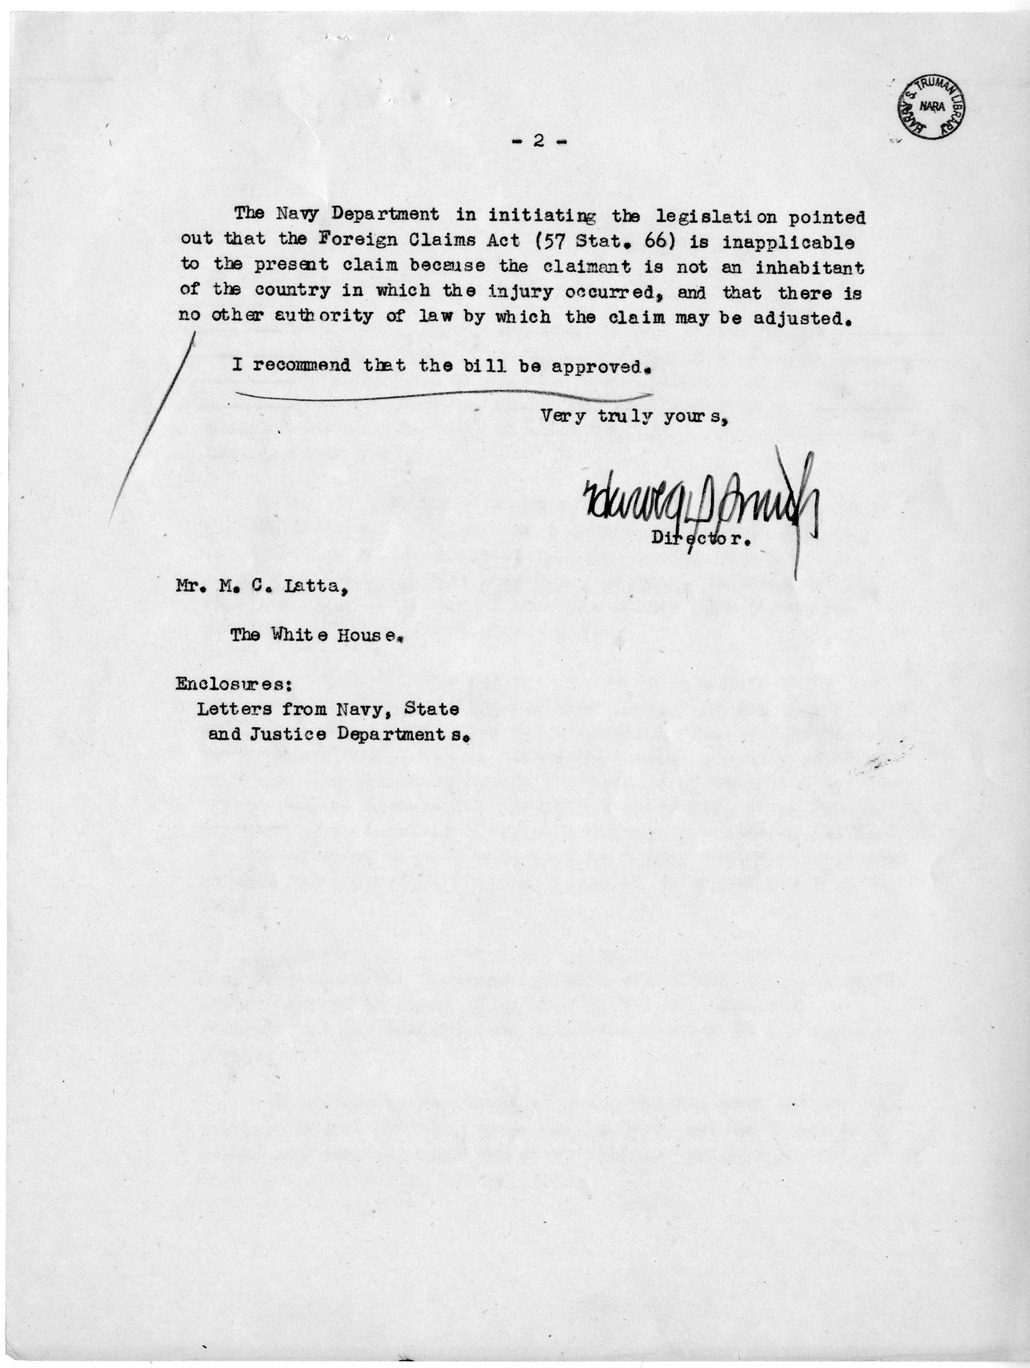 Memorandum from Harold D. Smith to M. C. Latta, S. 1361, To Compensate Clement Euzeire, an Inhabitant of French Morocco, for Personal Injuries Caused by a Naval Vehicle Near Oran, Algeria, on September 21, 1943, with Attachments